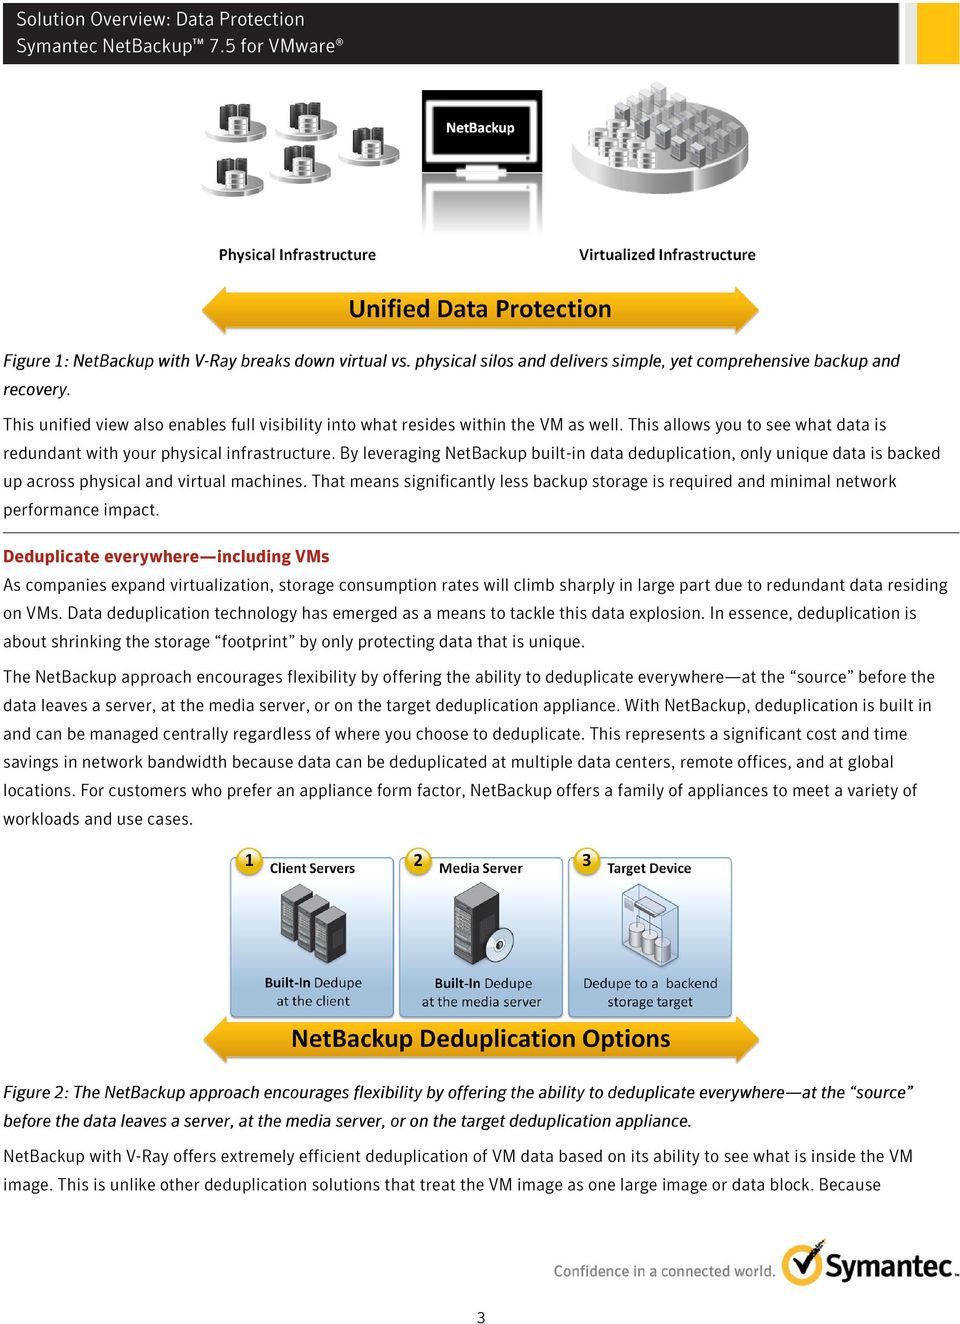 By leveraging NetBackup built-in data deduplication, only unique data is backed up across physical and virtual machines.